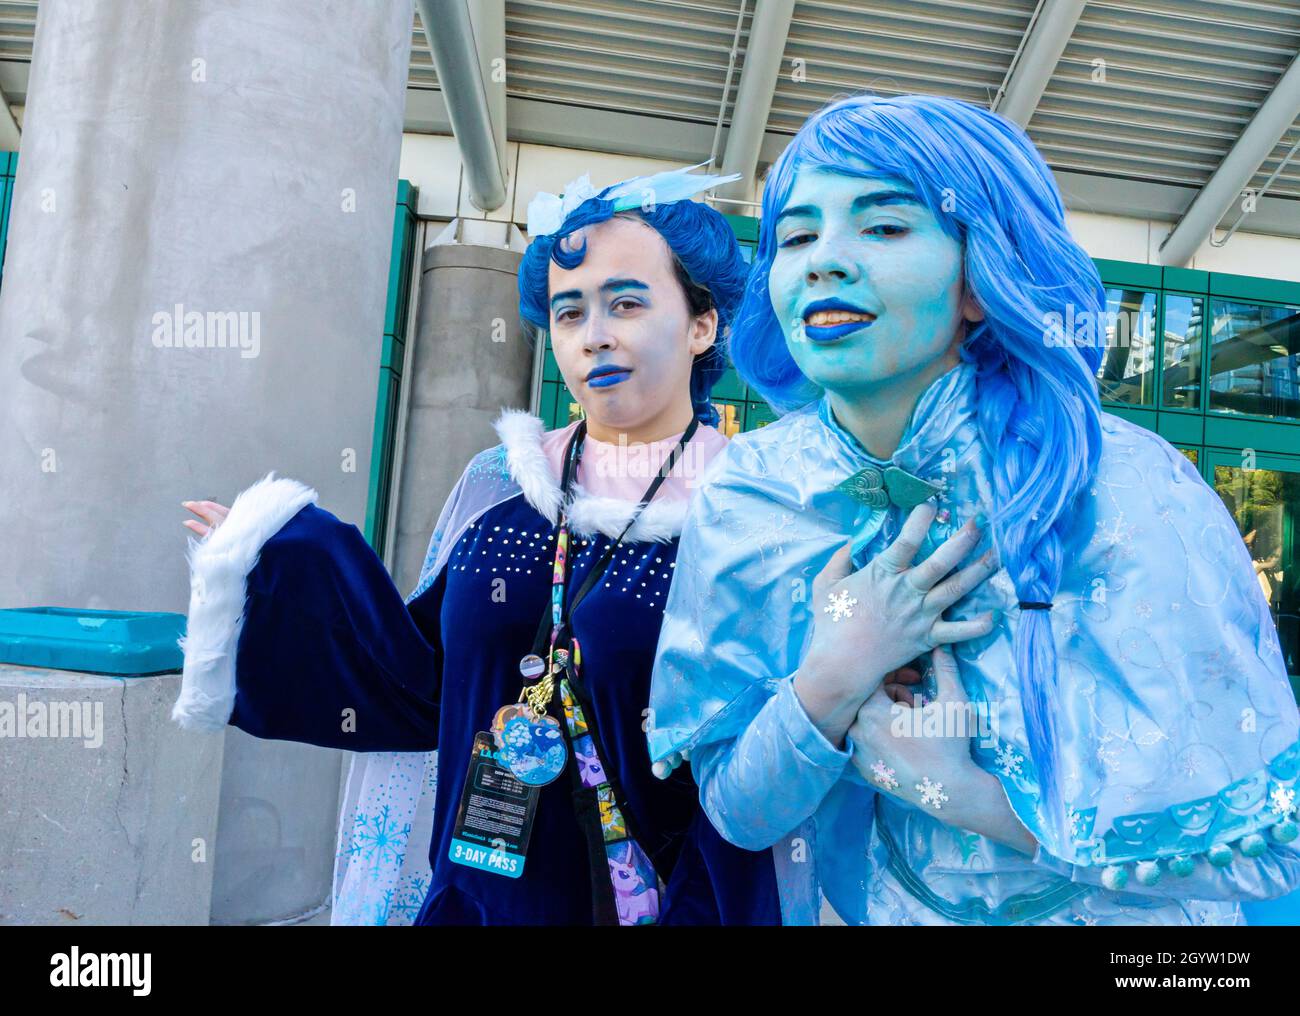 Attendees cosplayers portraying Emily the Corpse Bride in blue clothes and makeup at Comic Con in Los Angeles, CA, United States Stock Photo